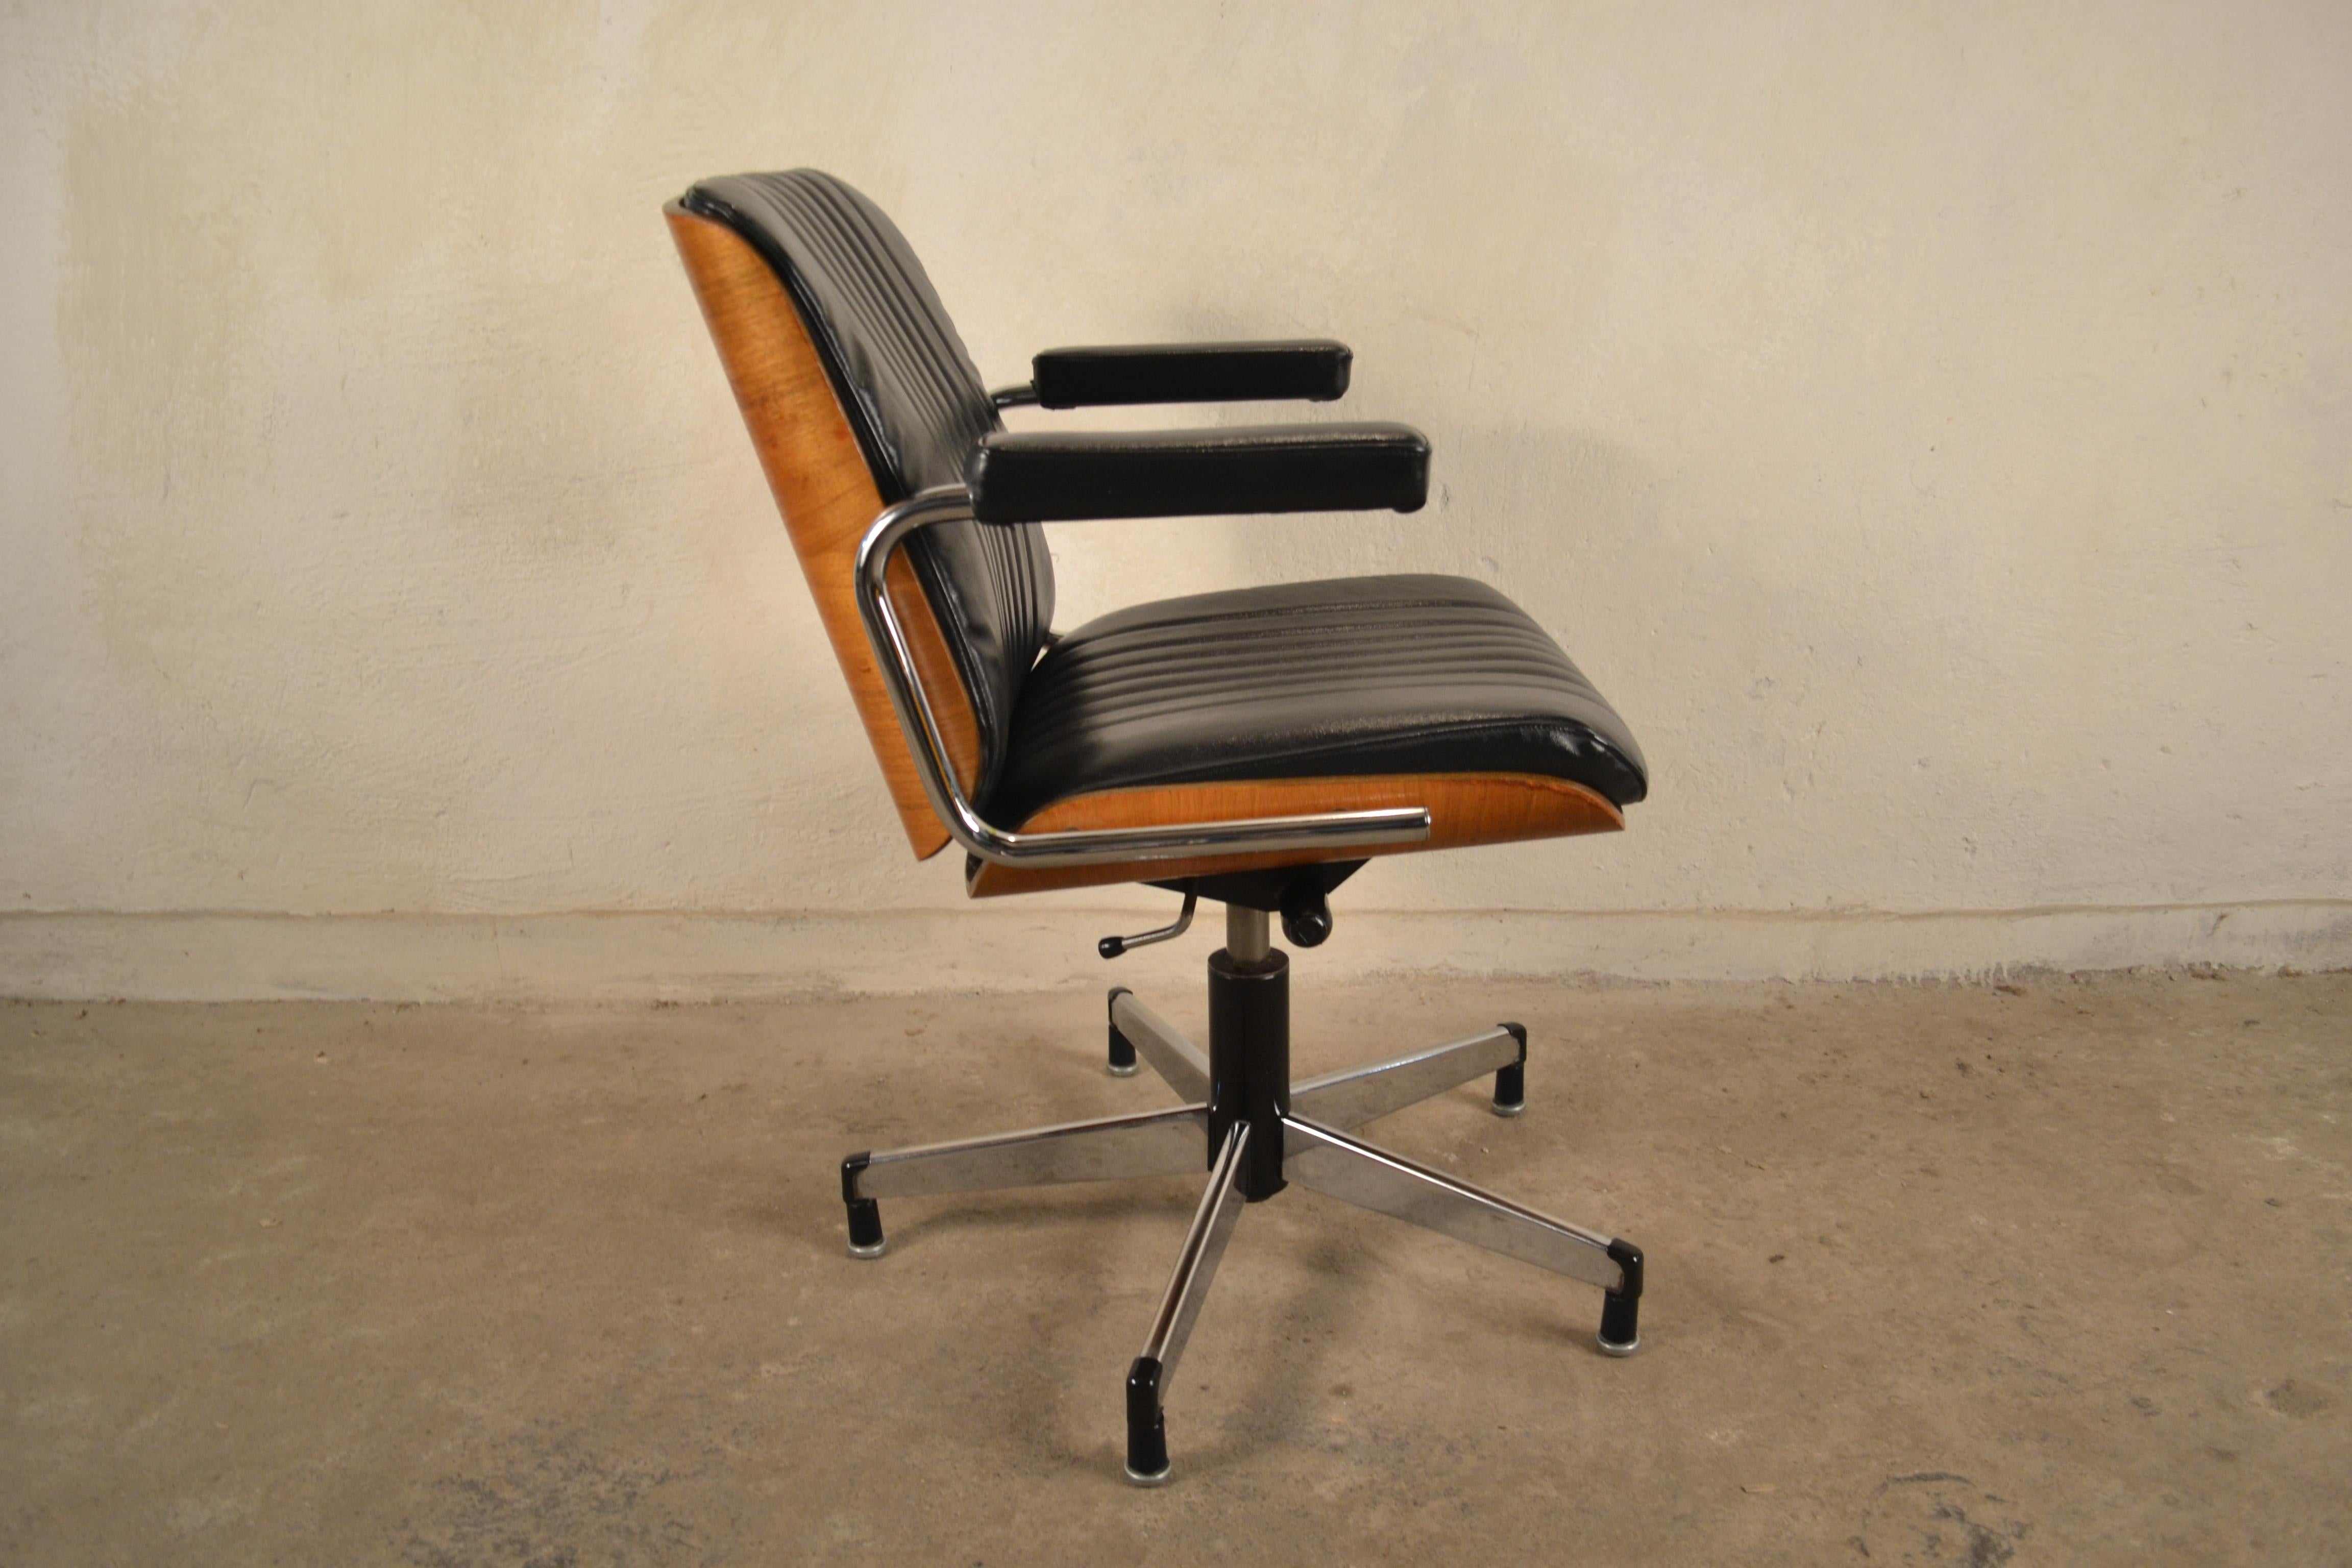 Armchair Stoll Giroflex 7125, Switzerland from the 1960s. Original and signed. Classics and extraordinary form in one. Very good condition.